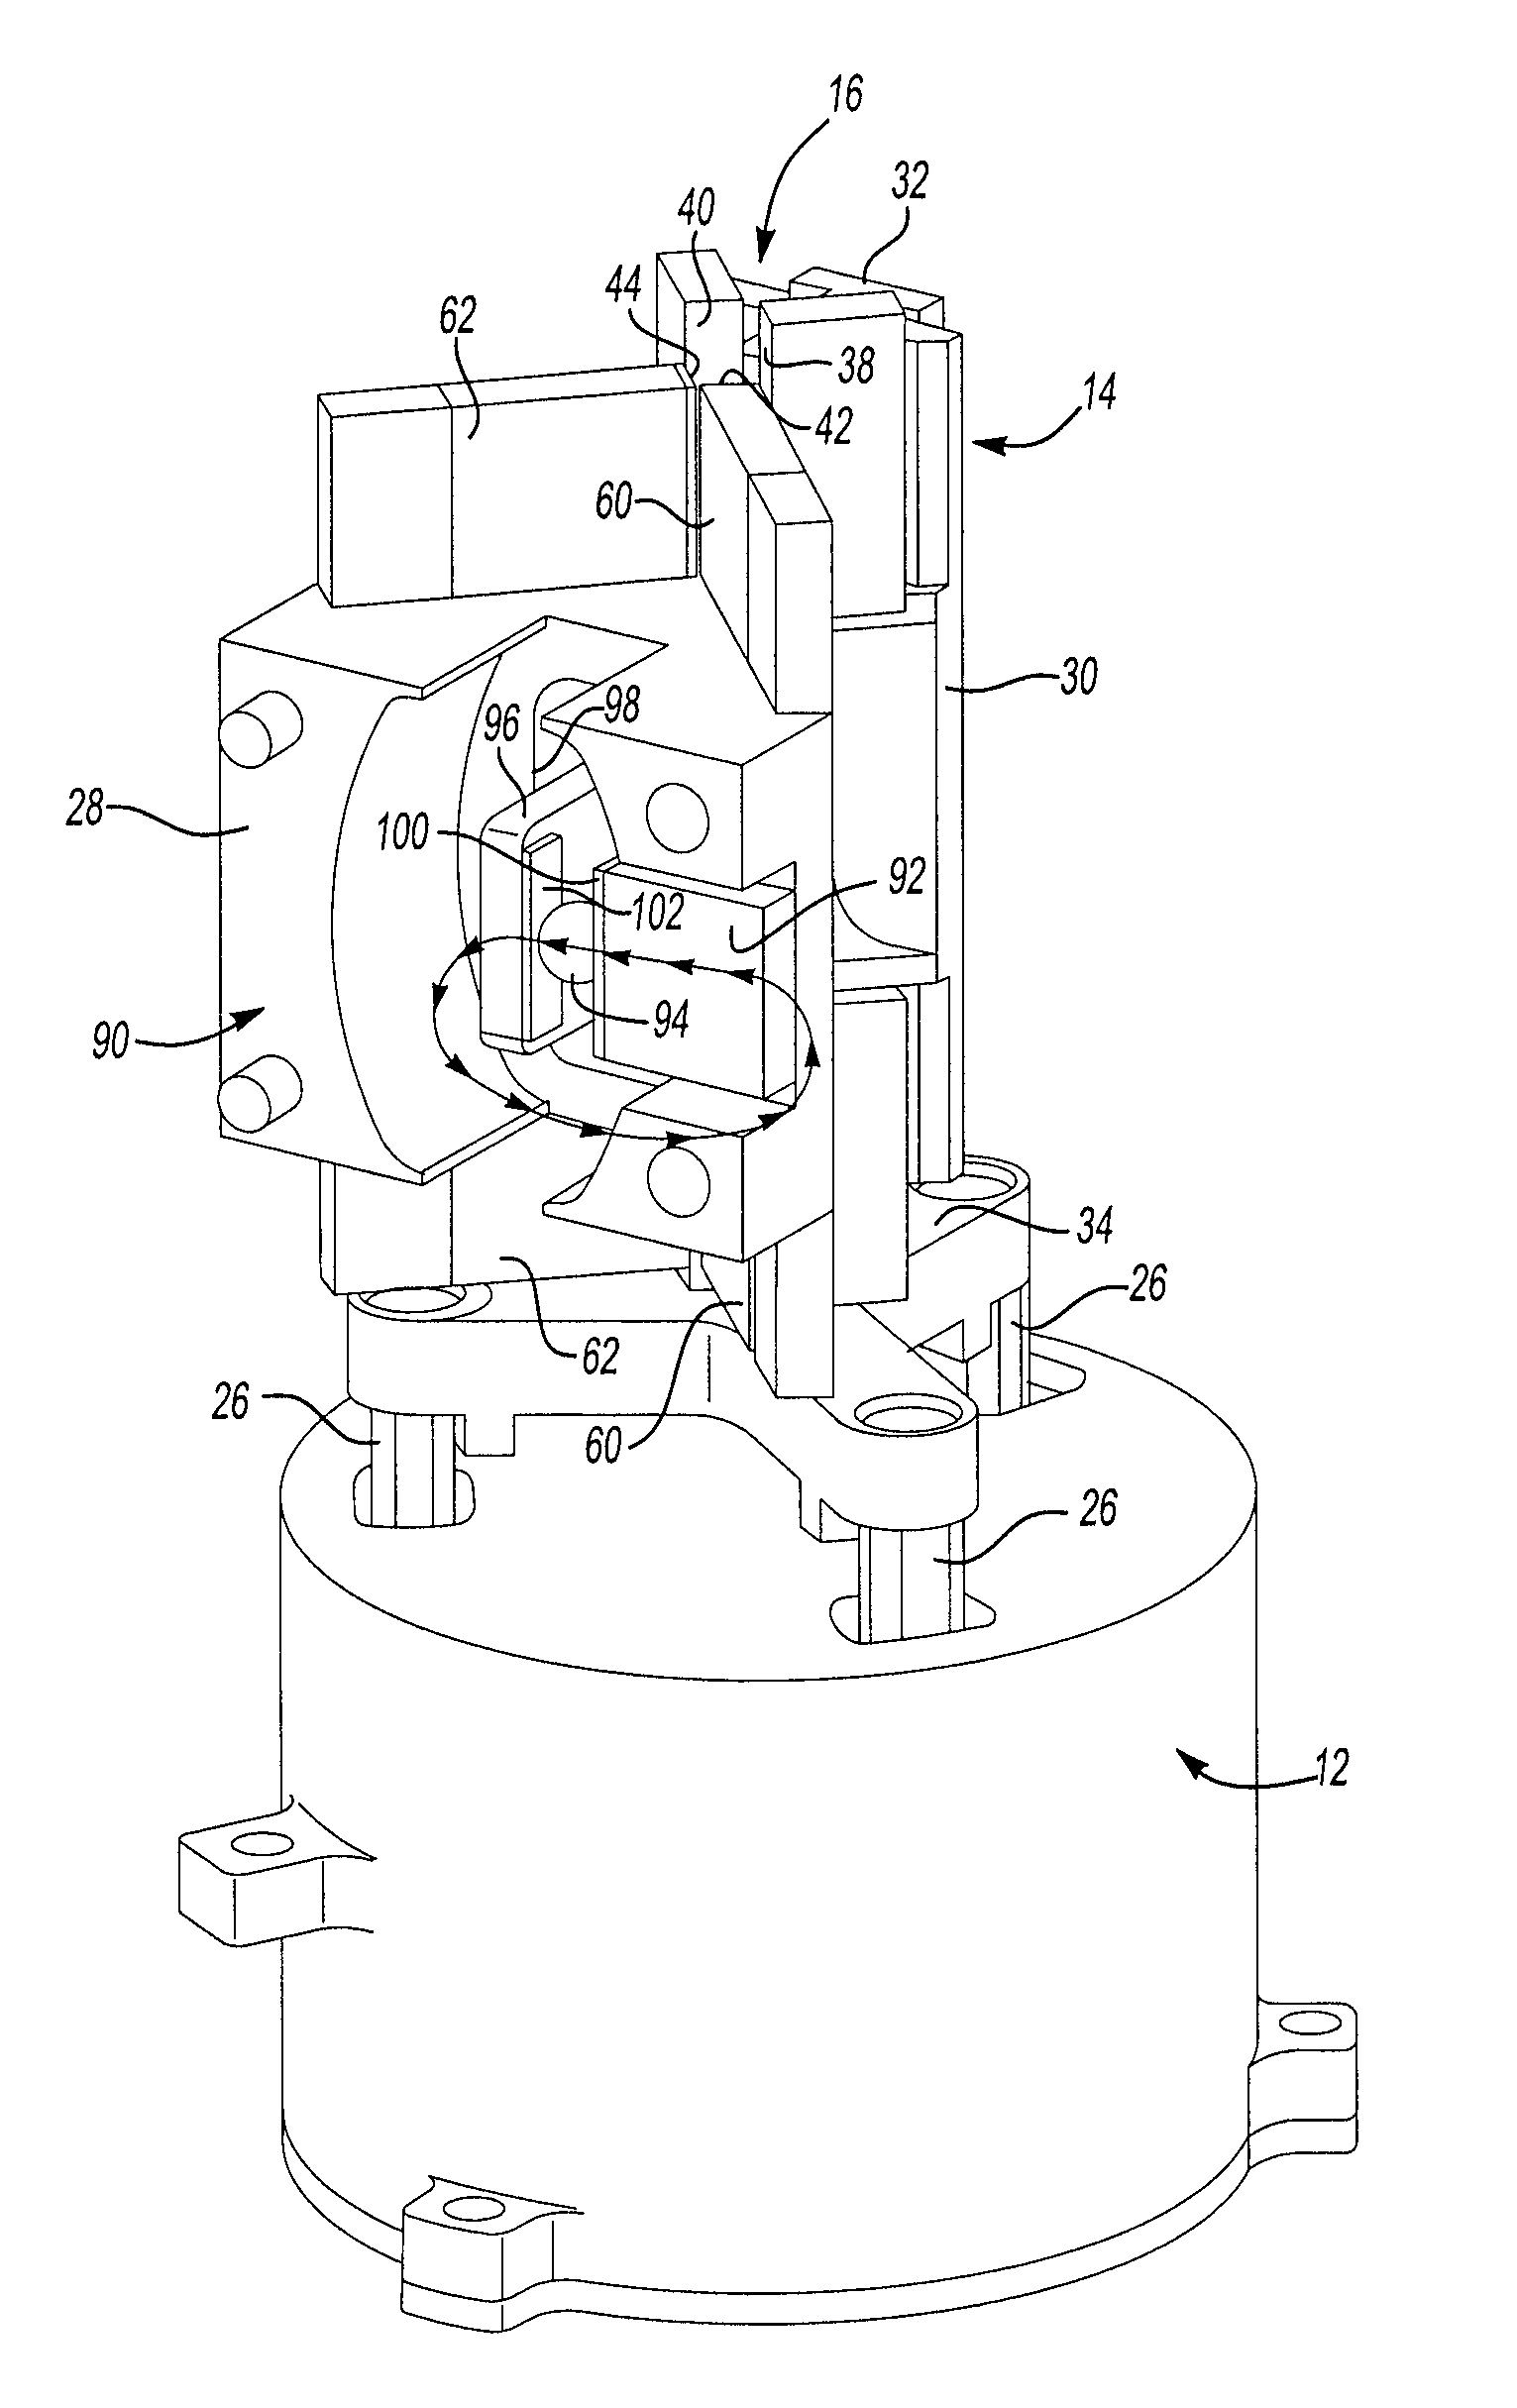 Magnetically preloaded anti-rotation guide for a transducer